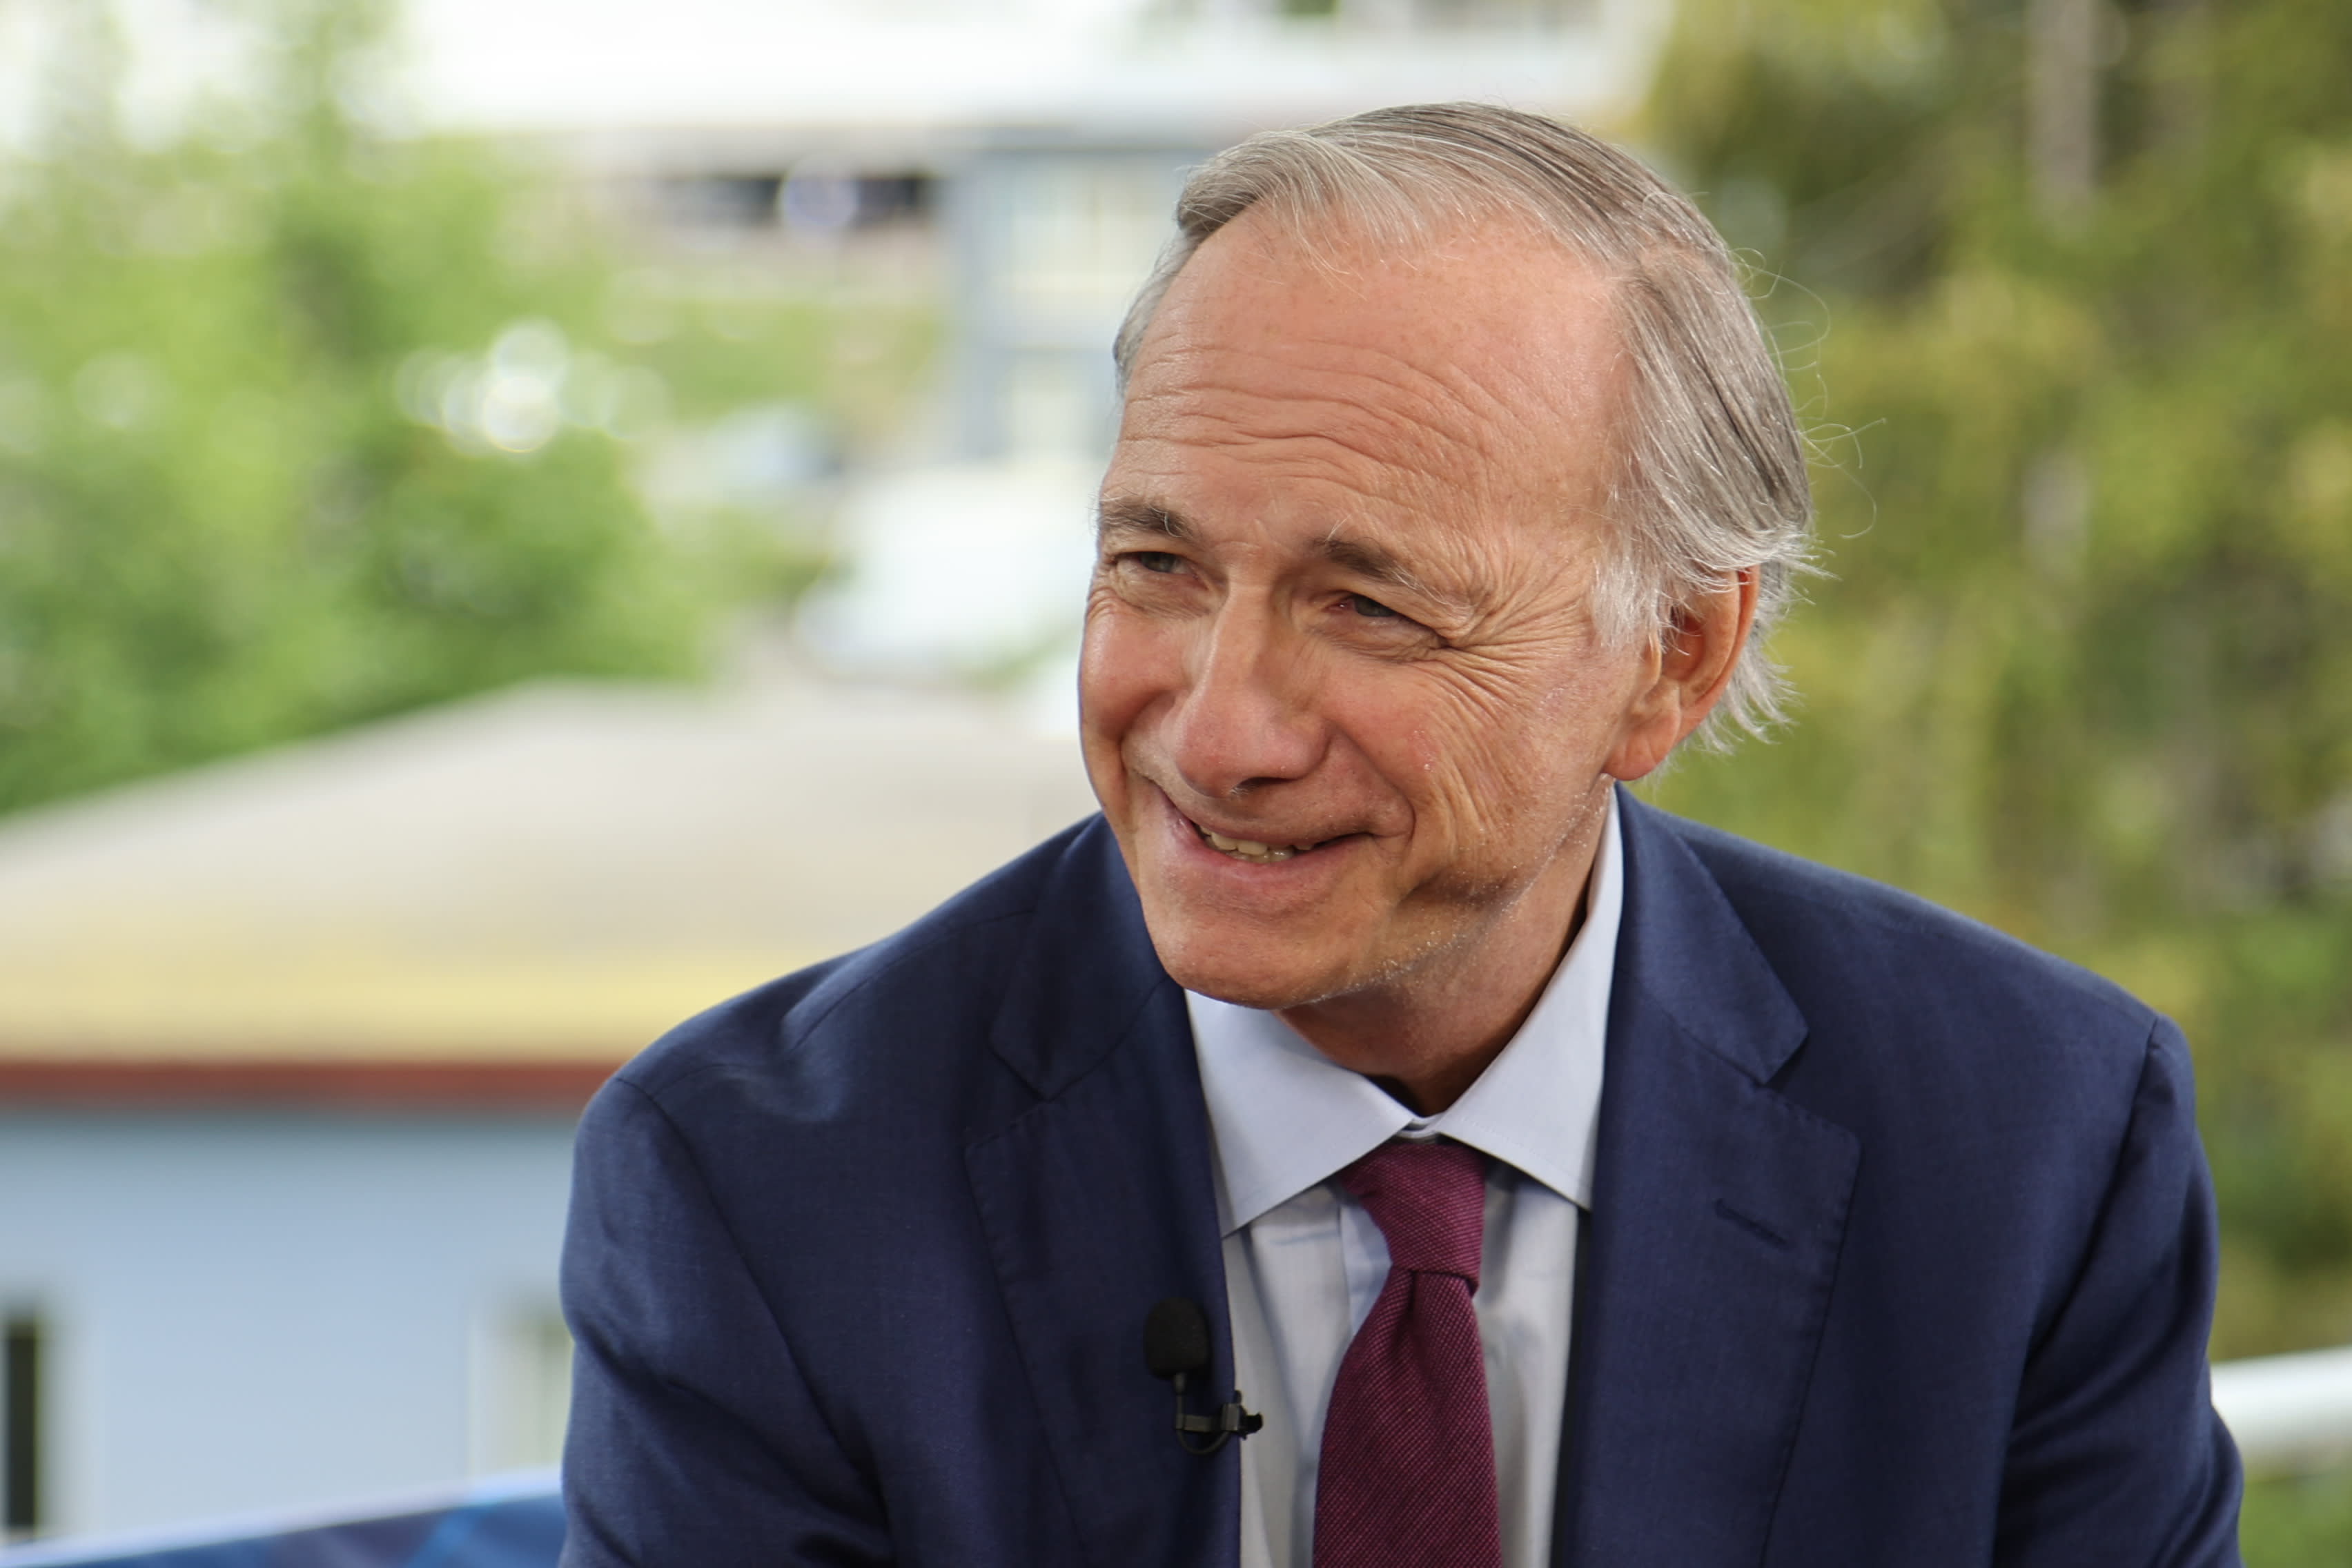 Ray Dalio says he's changed his mind and cash is no longer trash as an investment